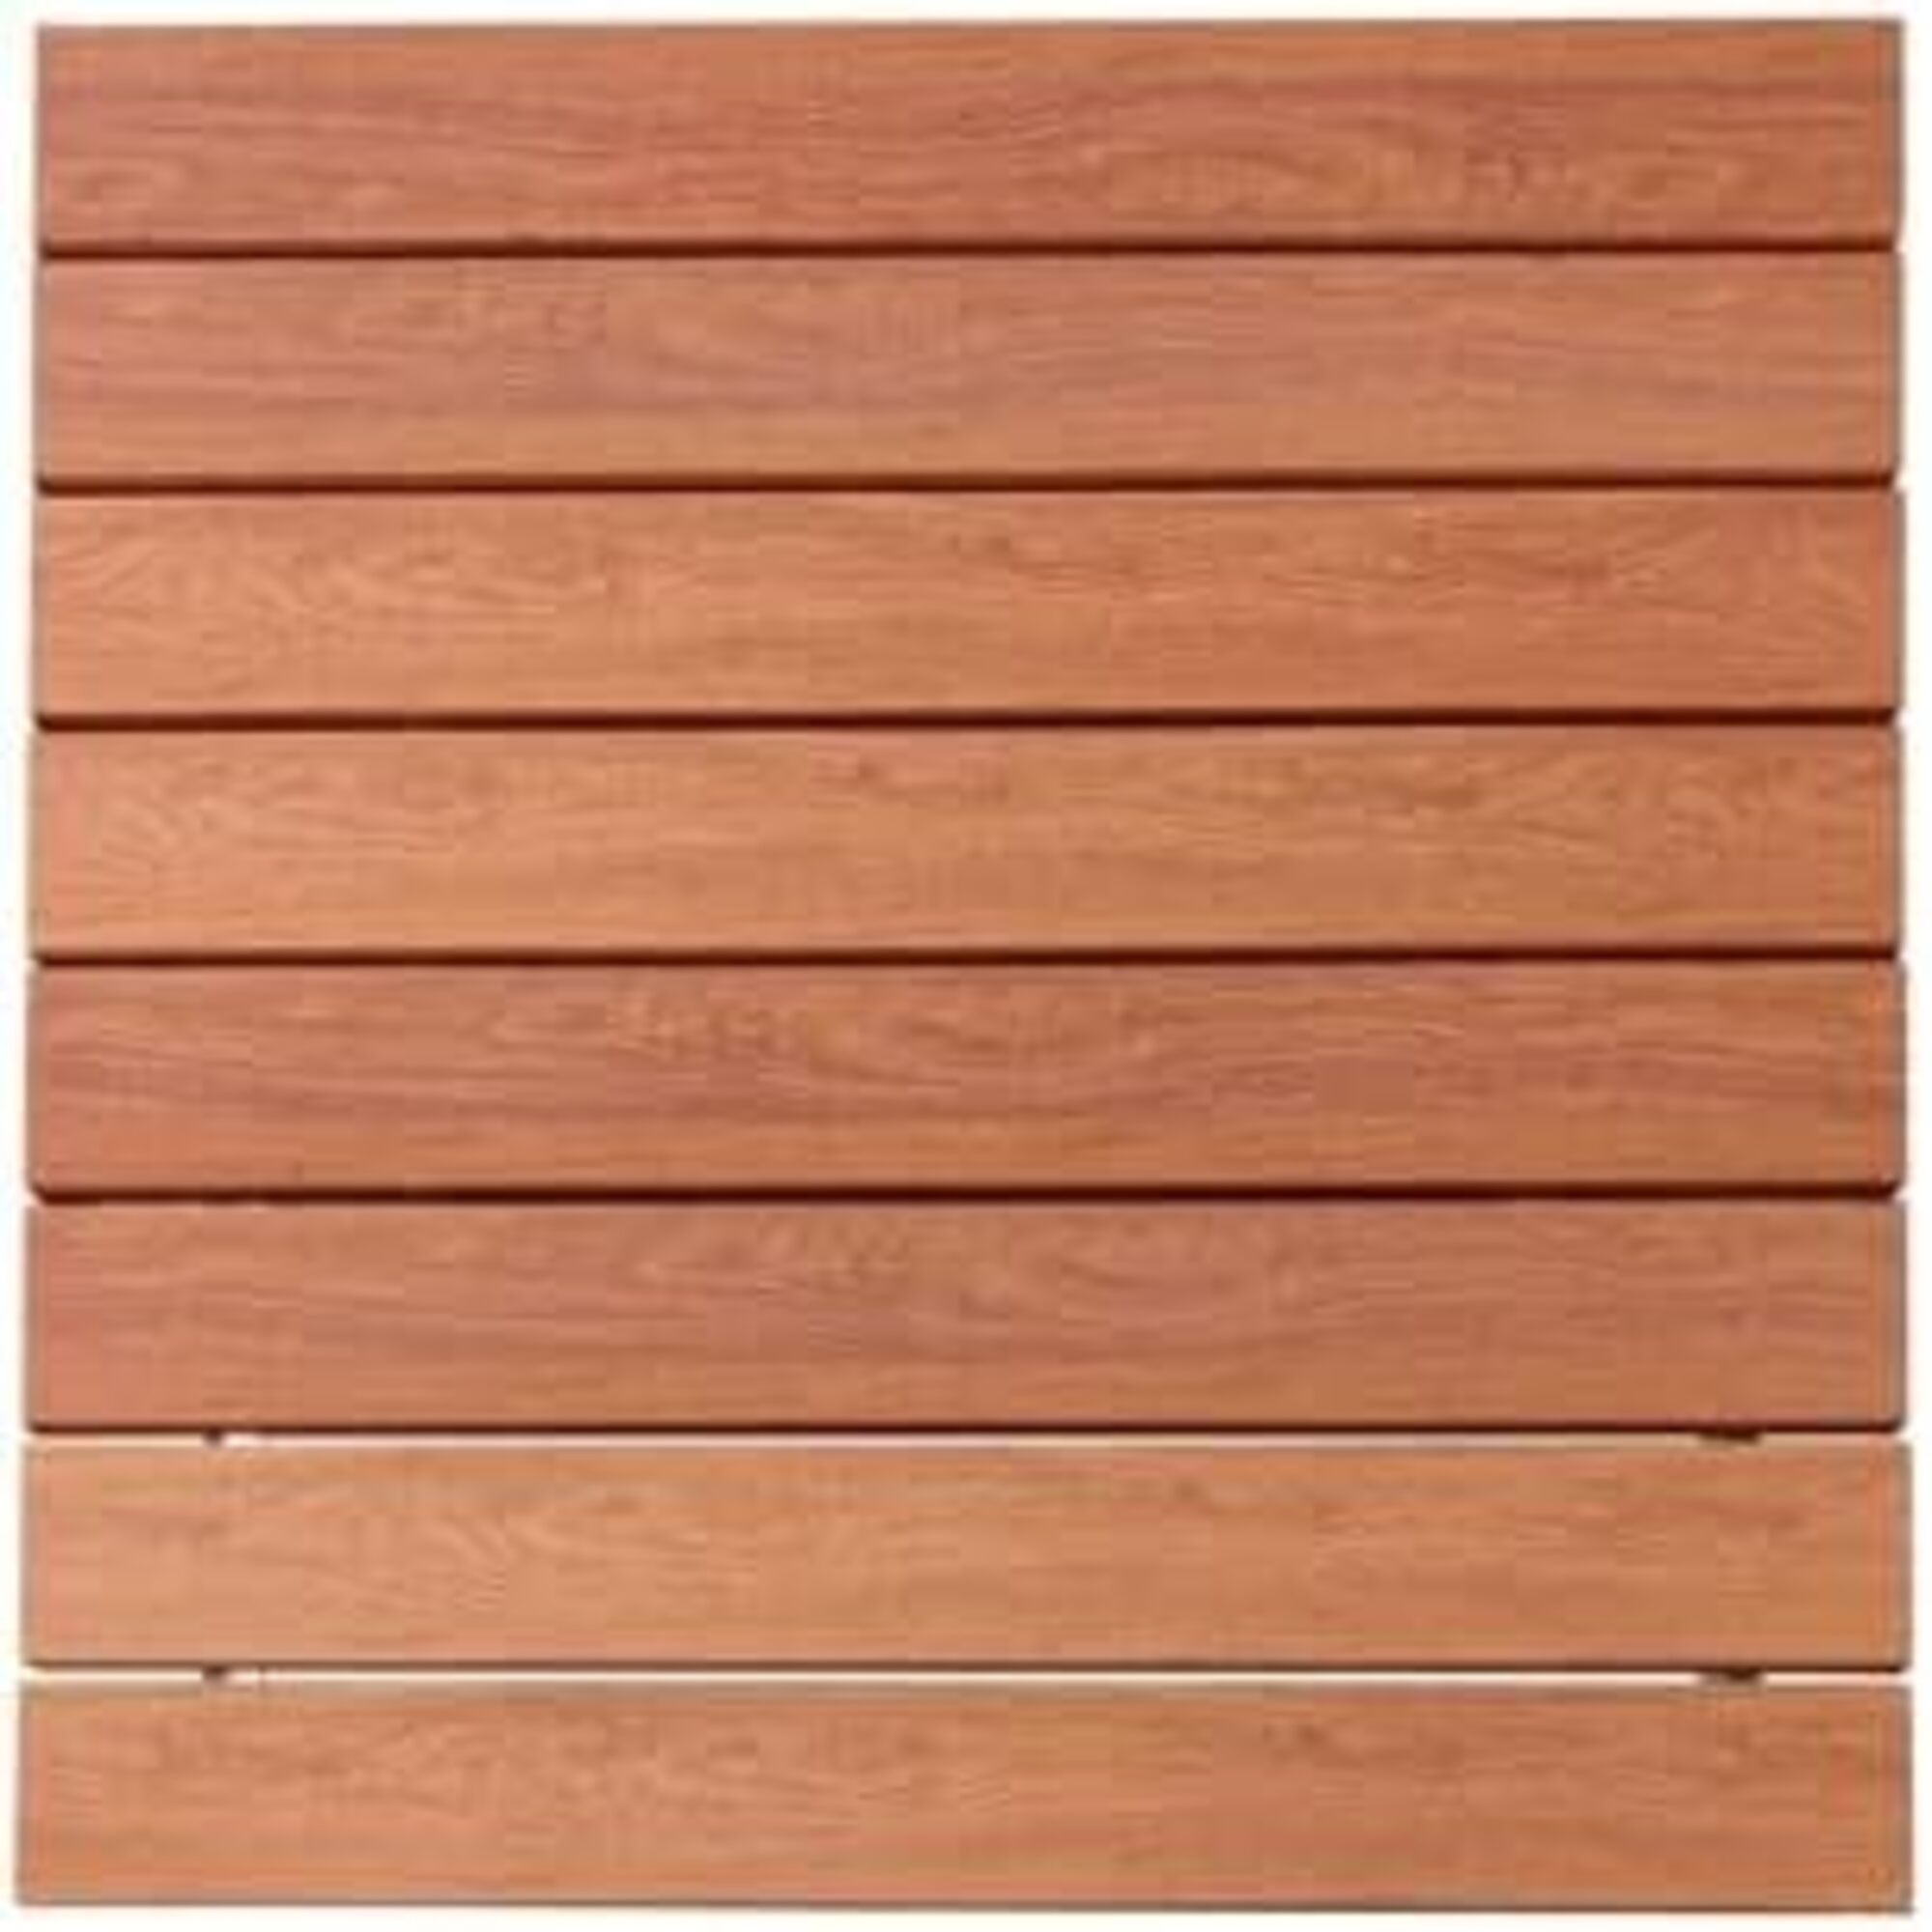 Patriot Docks, Aluminum 4ft.x4ft. Deck Section, Brown Wood Grain, Product Type Hardware, Length 48 in, Width 48 in, Model 10967